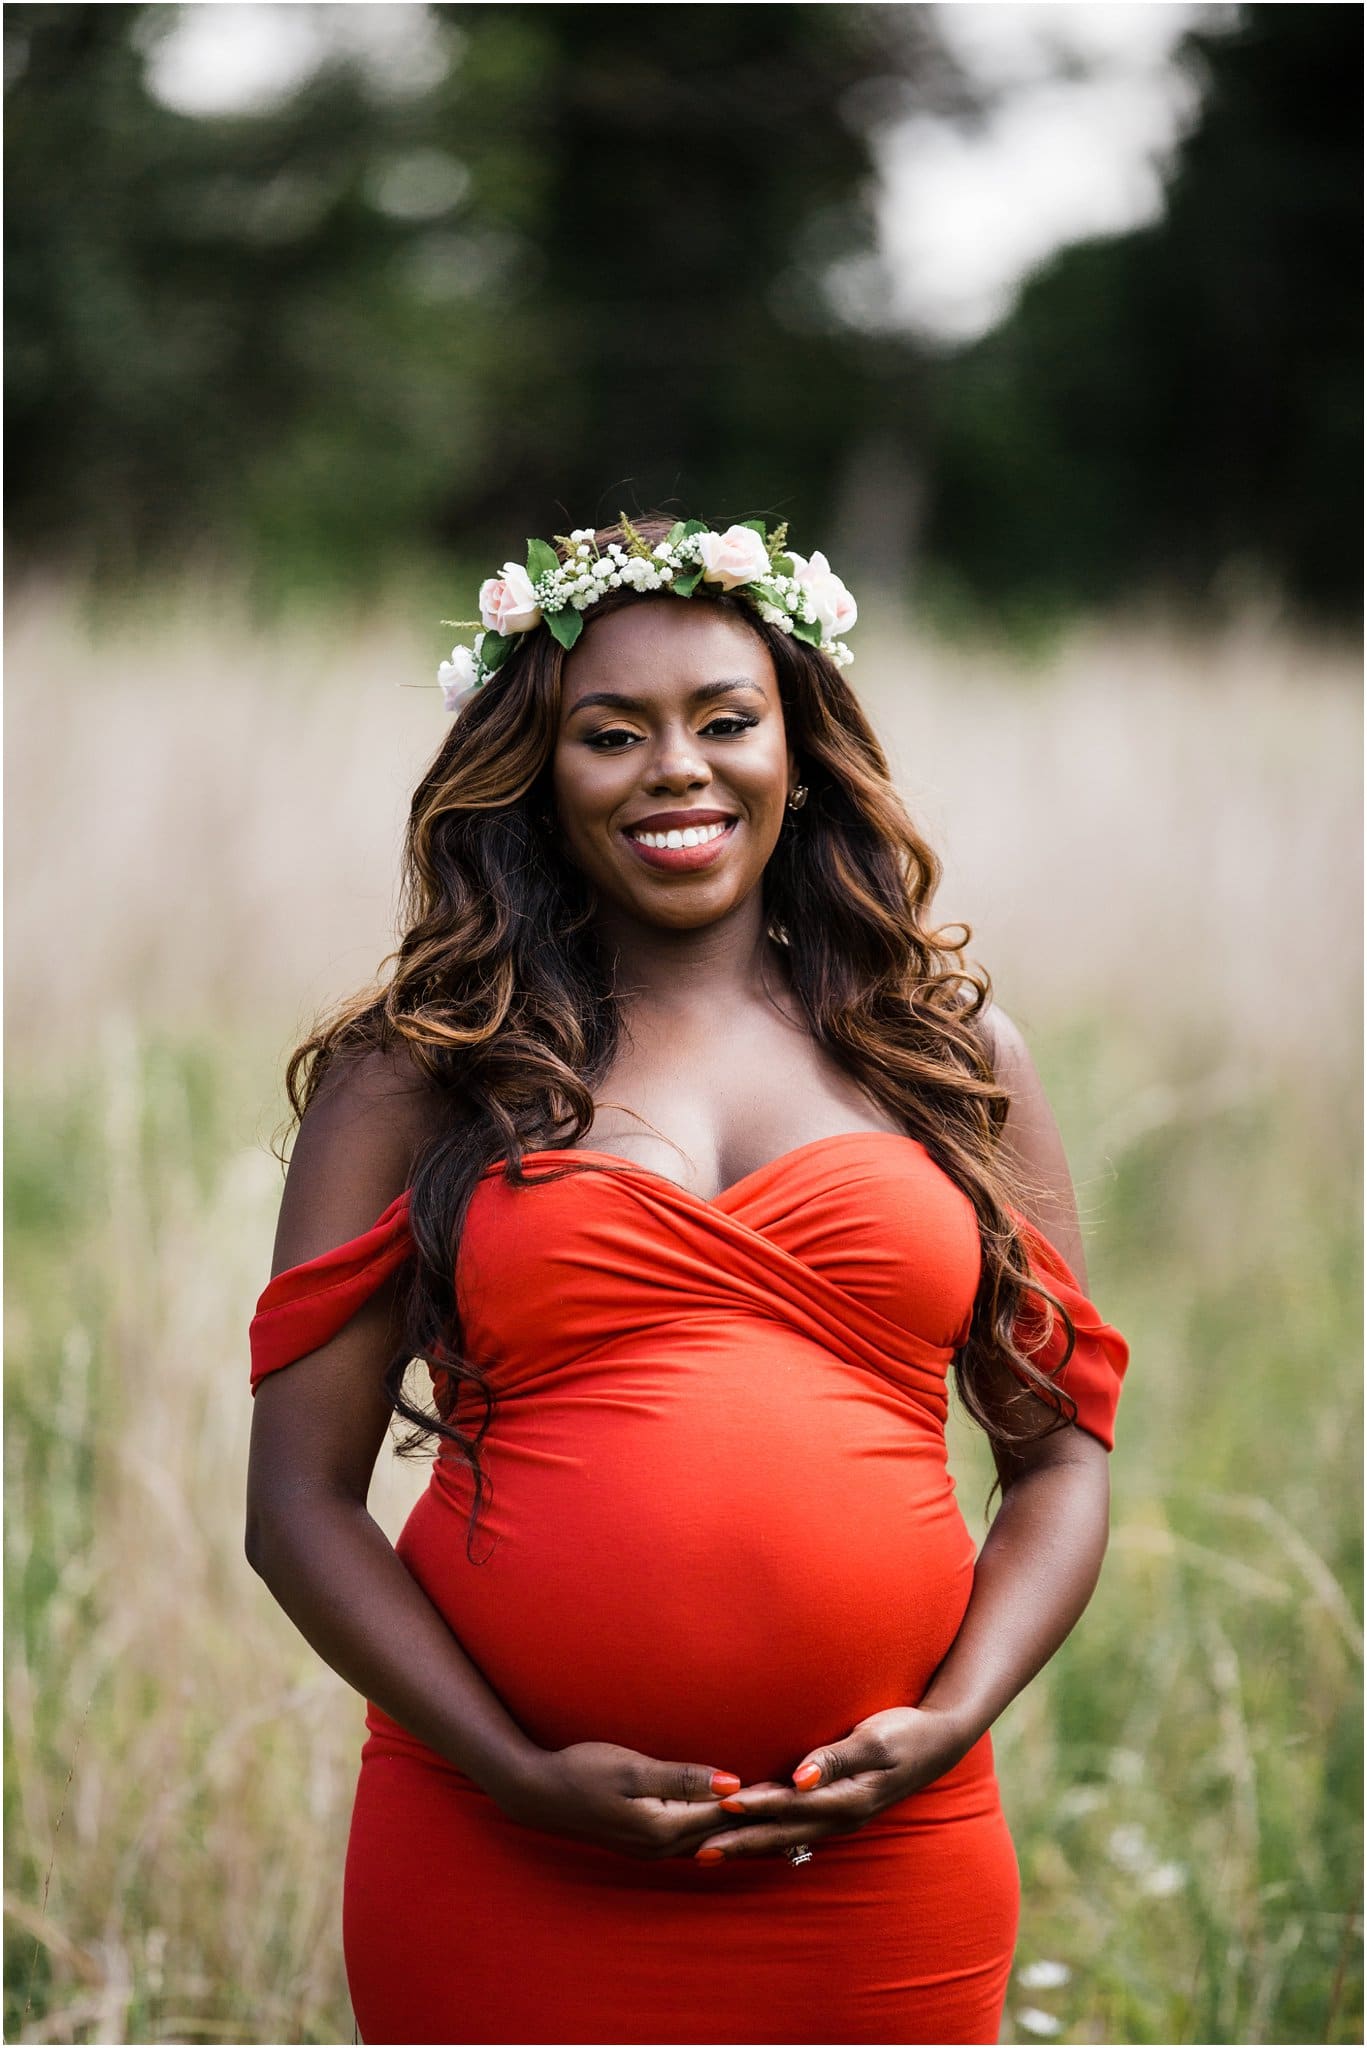 Glam red maternity dress and flower crown 